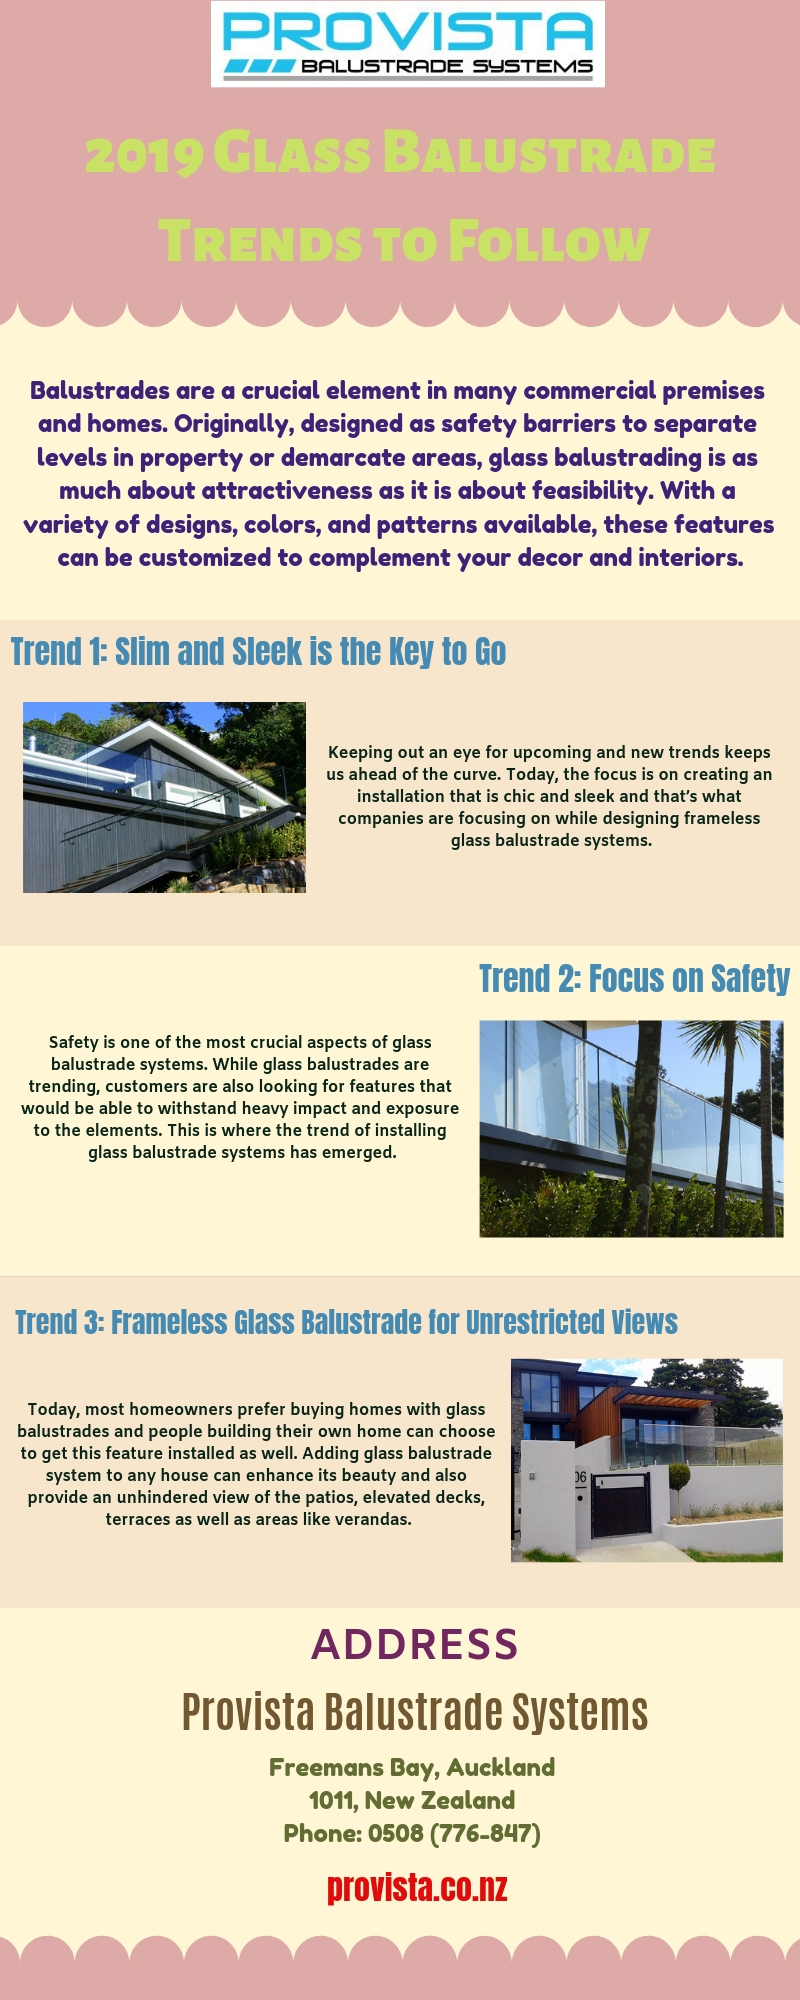 2019 Glass Balustrade Trends to Follow.jpg Balustrades design trends for modern homes!! Whether you want a seamless subtle finish or a stylish design pattern, glass balustrades have the solutions you need. For more details, visit this link: https://bit.ly/2RSeHs4
 by Provista